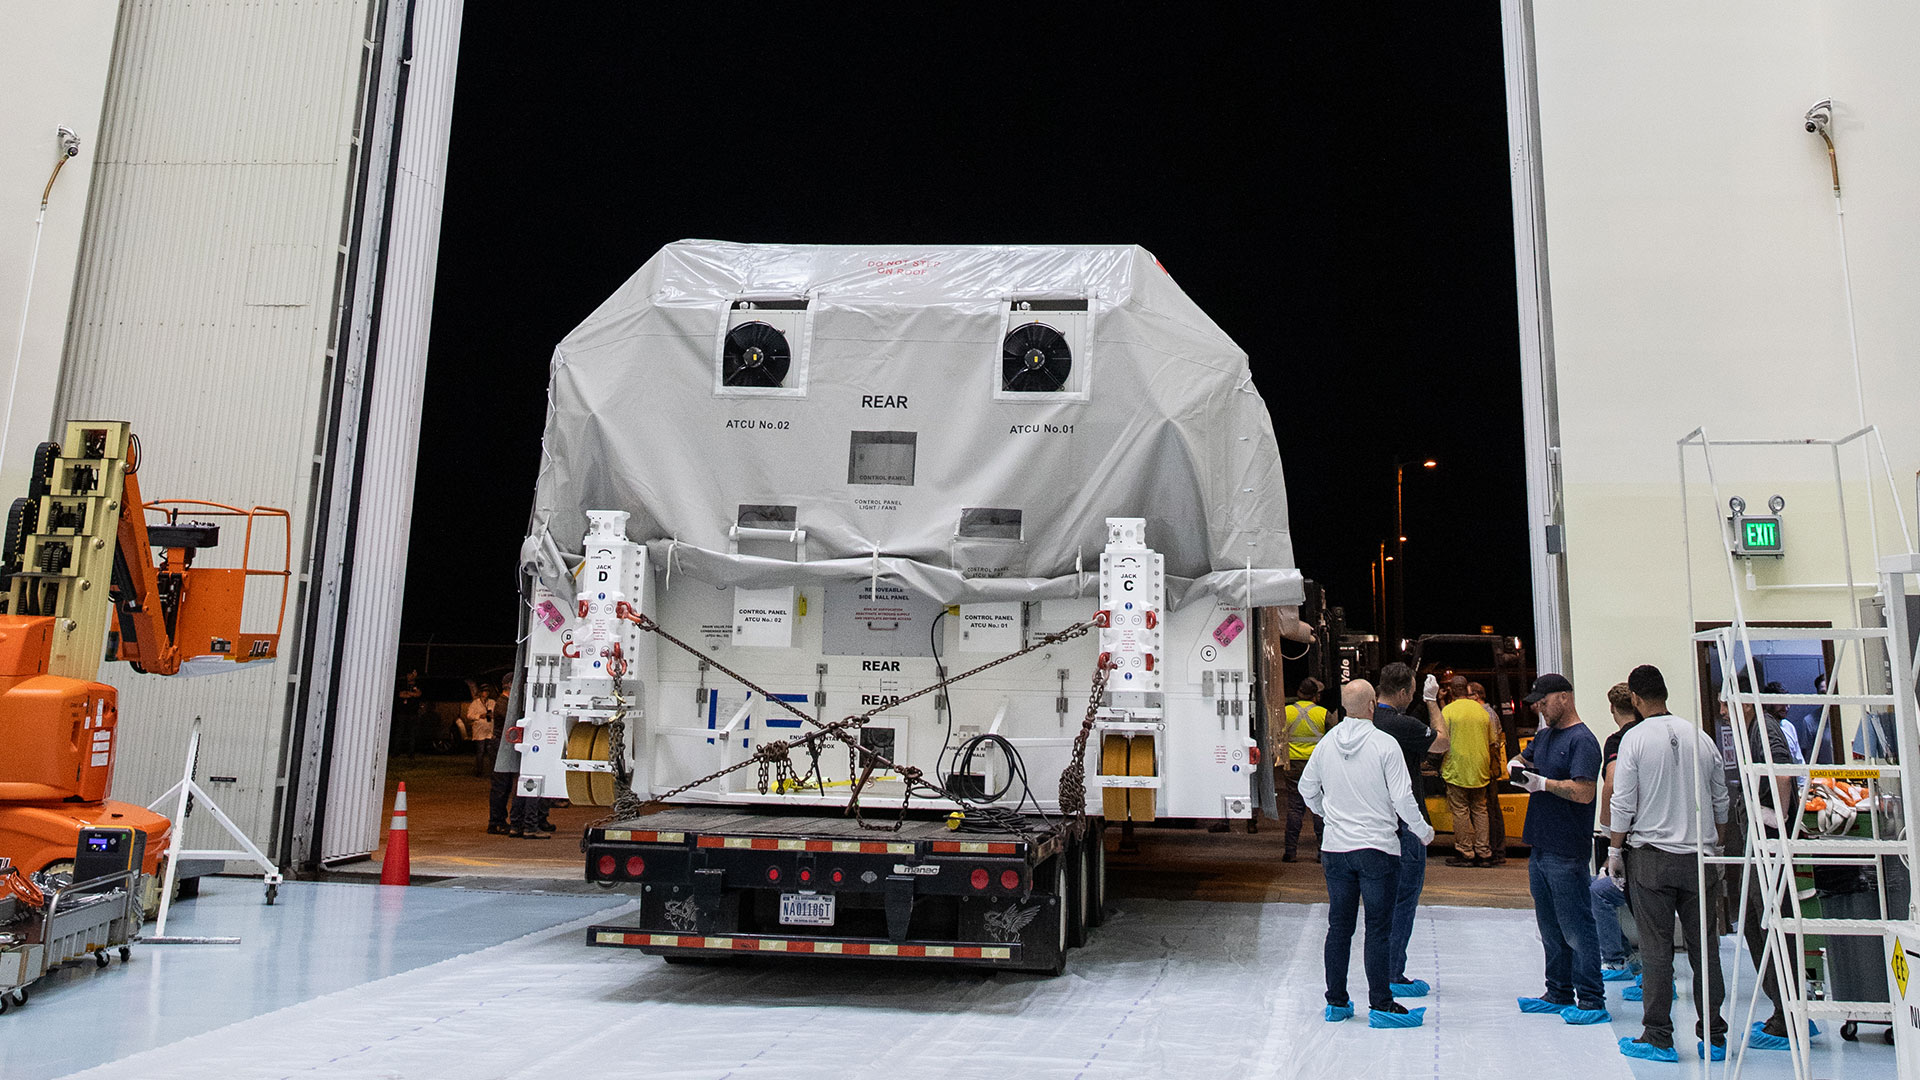 Europa Clipper is rolled into the Payload Hazardous Servicing Facility while workers stand nearby.